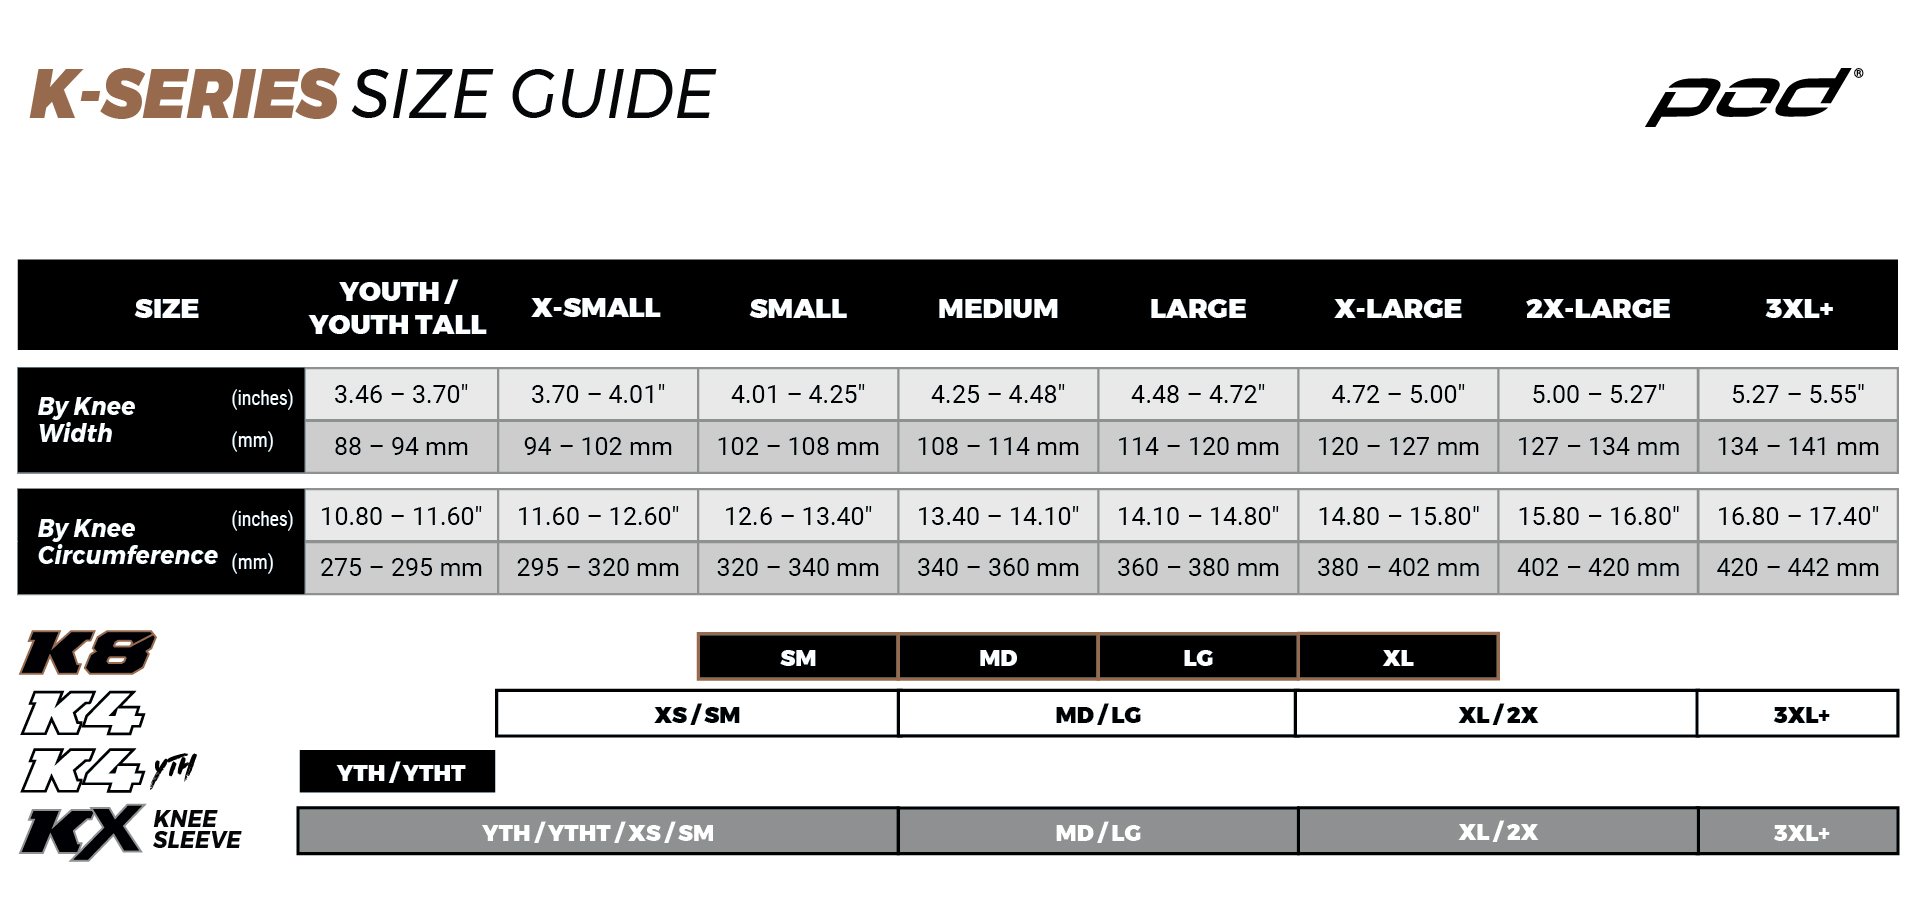 POD Knee Protection Size Guide